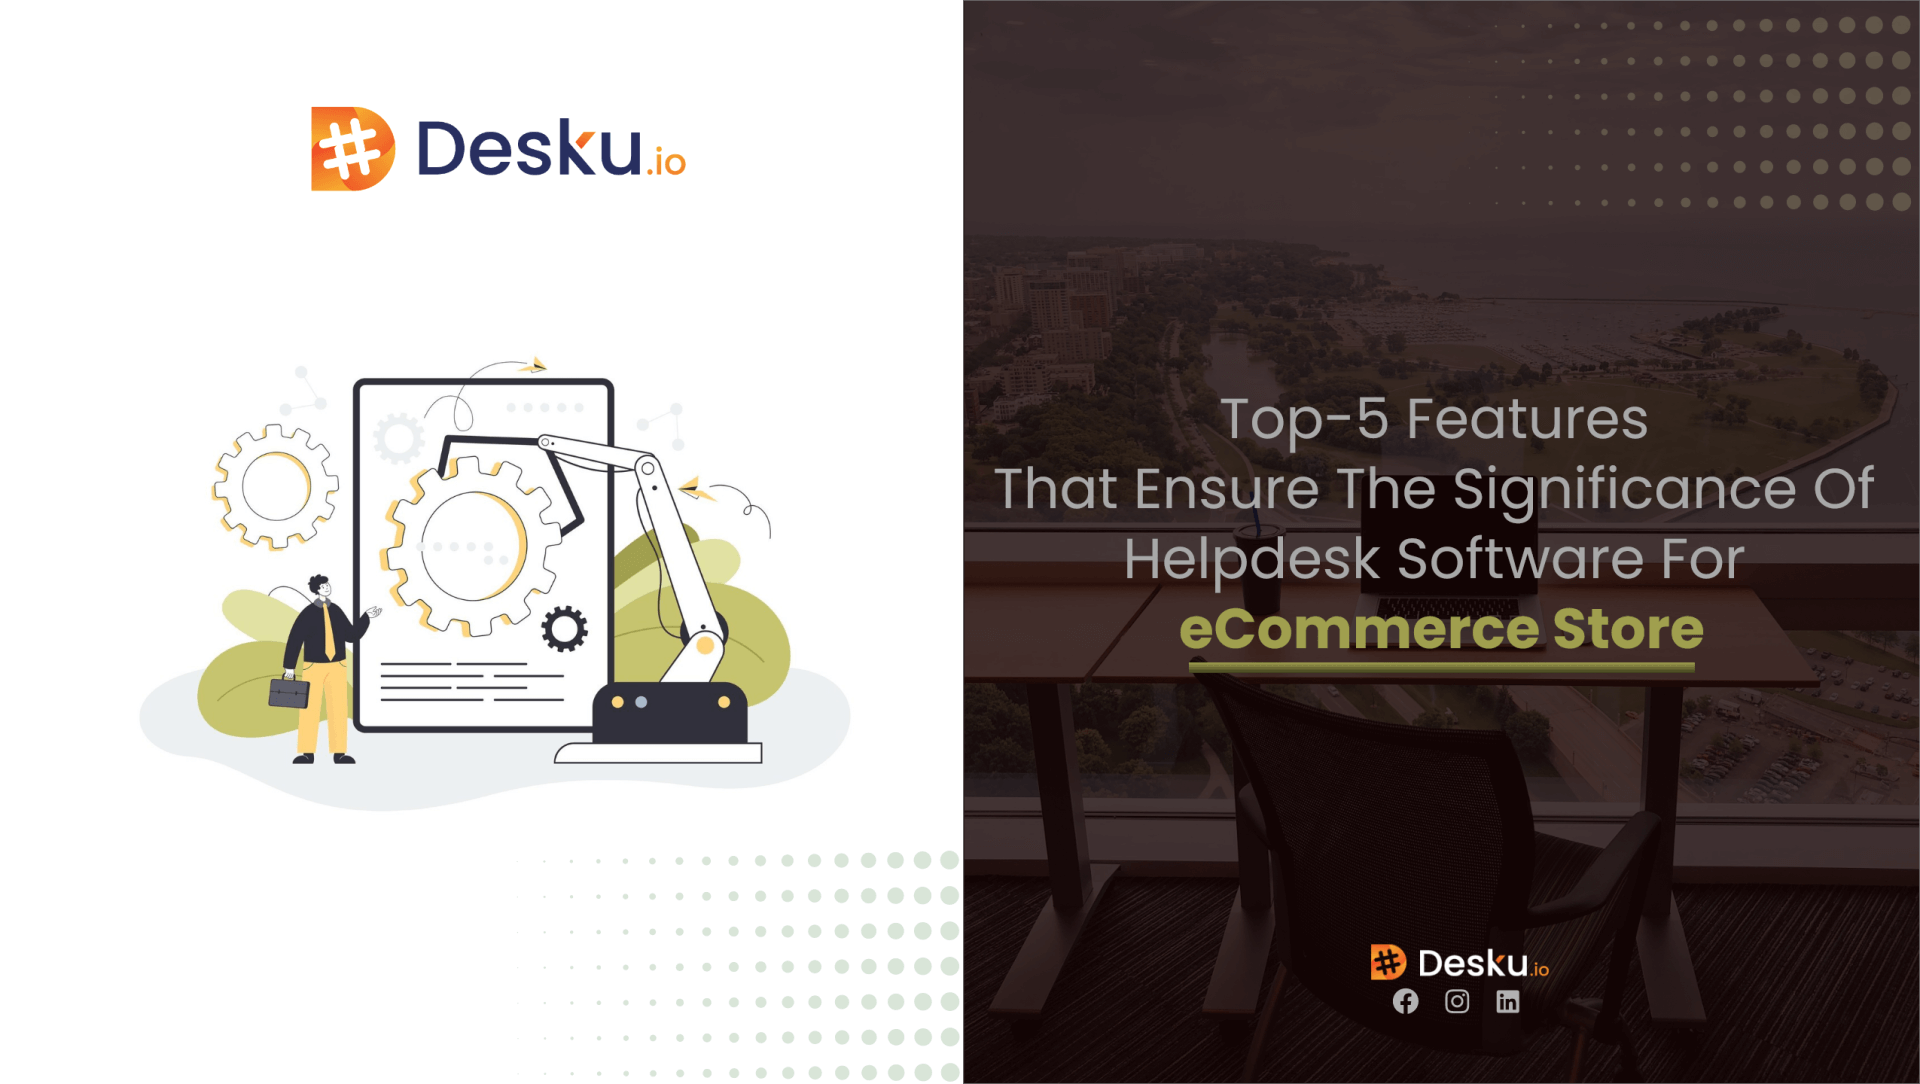 Top-5 features that ensure the significance of Helpdesk Software for eCommerce store